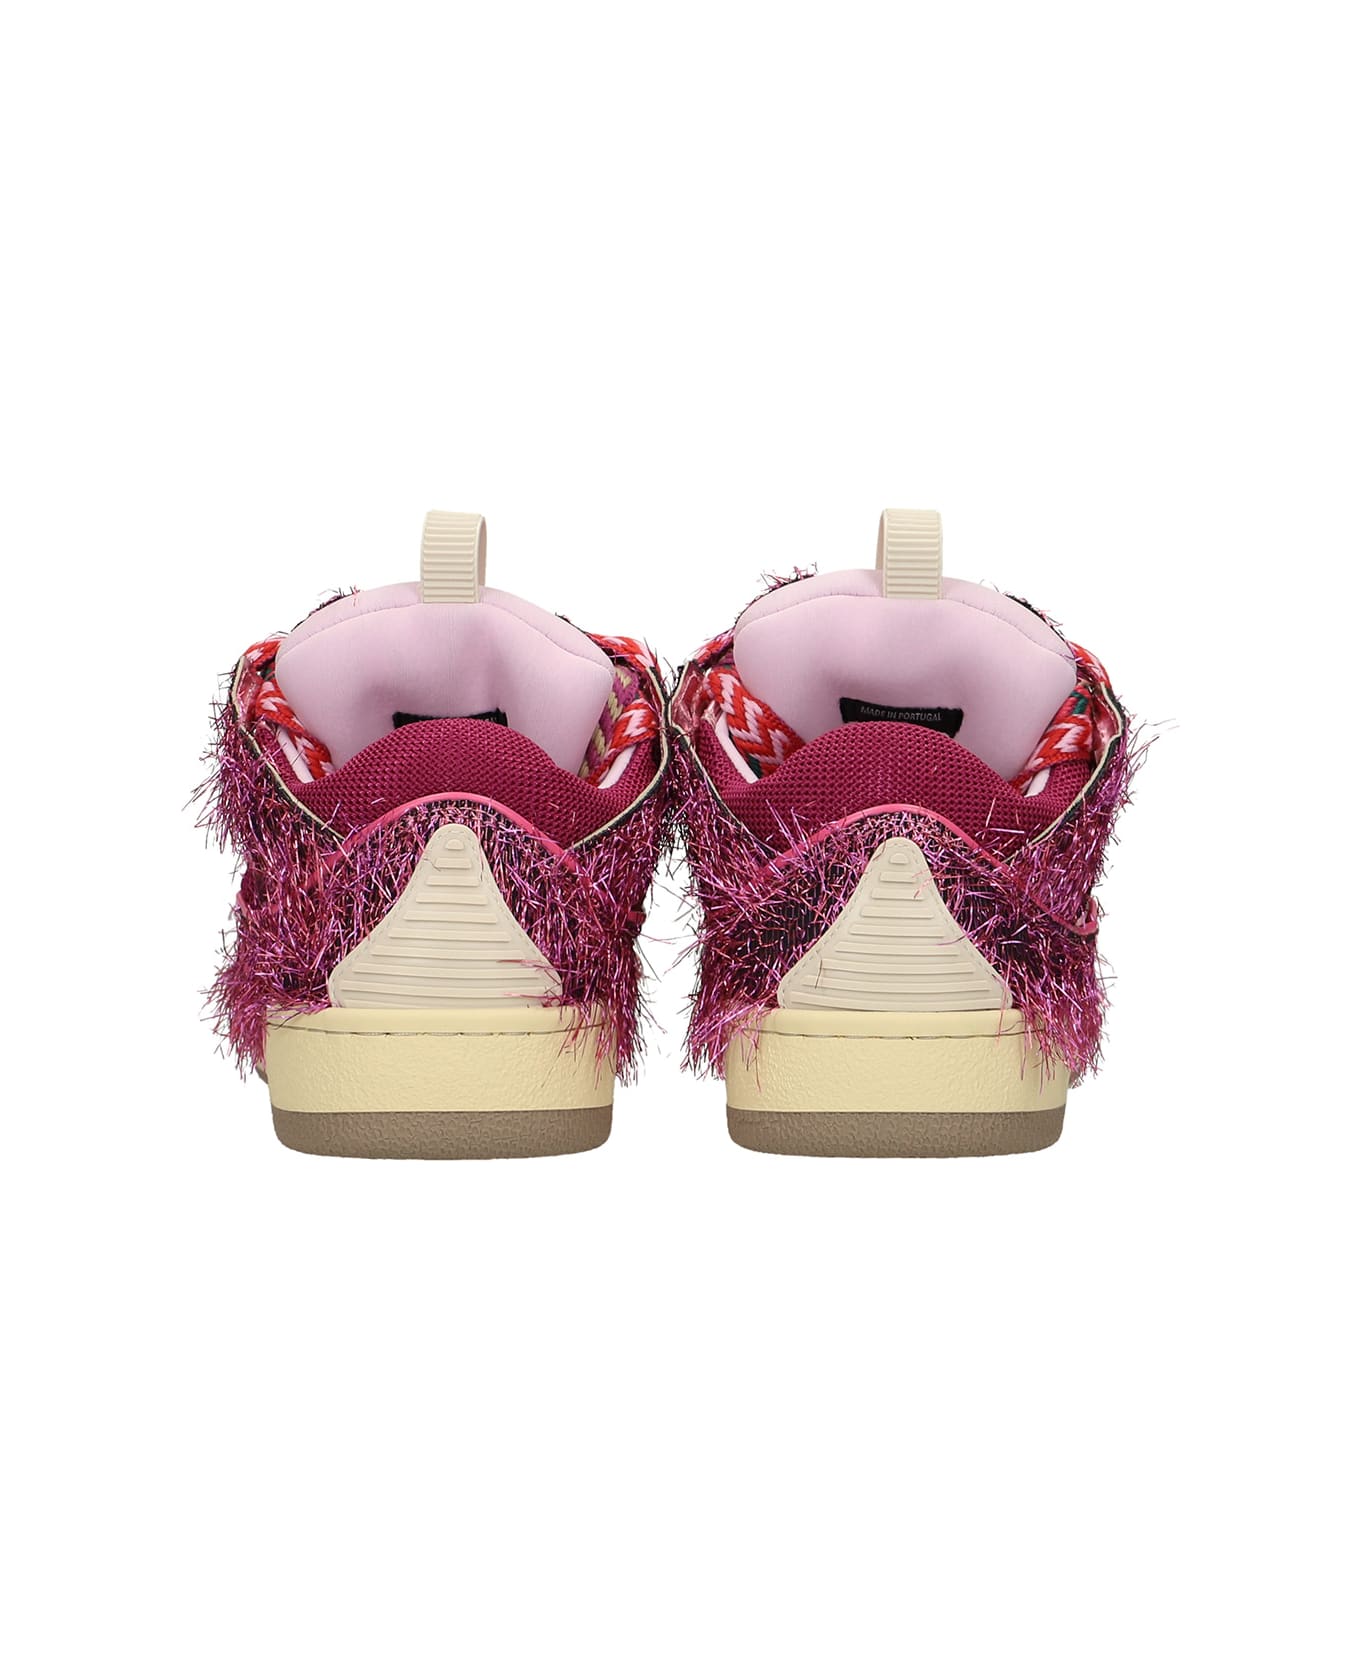 Lanvin Curb Sneakers In Rose-pink Synthetic Fibers - rose-pink